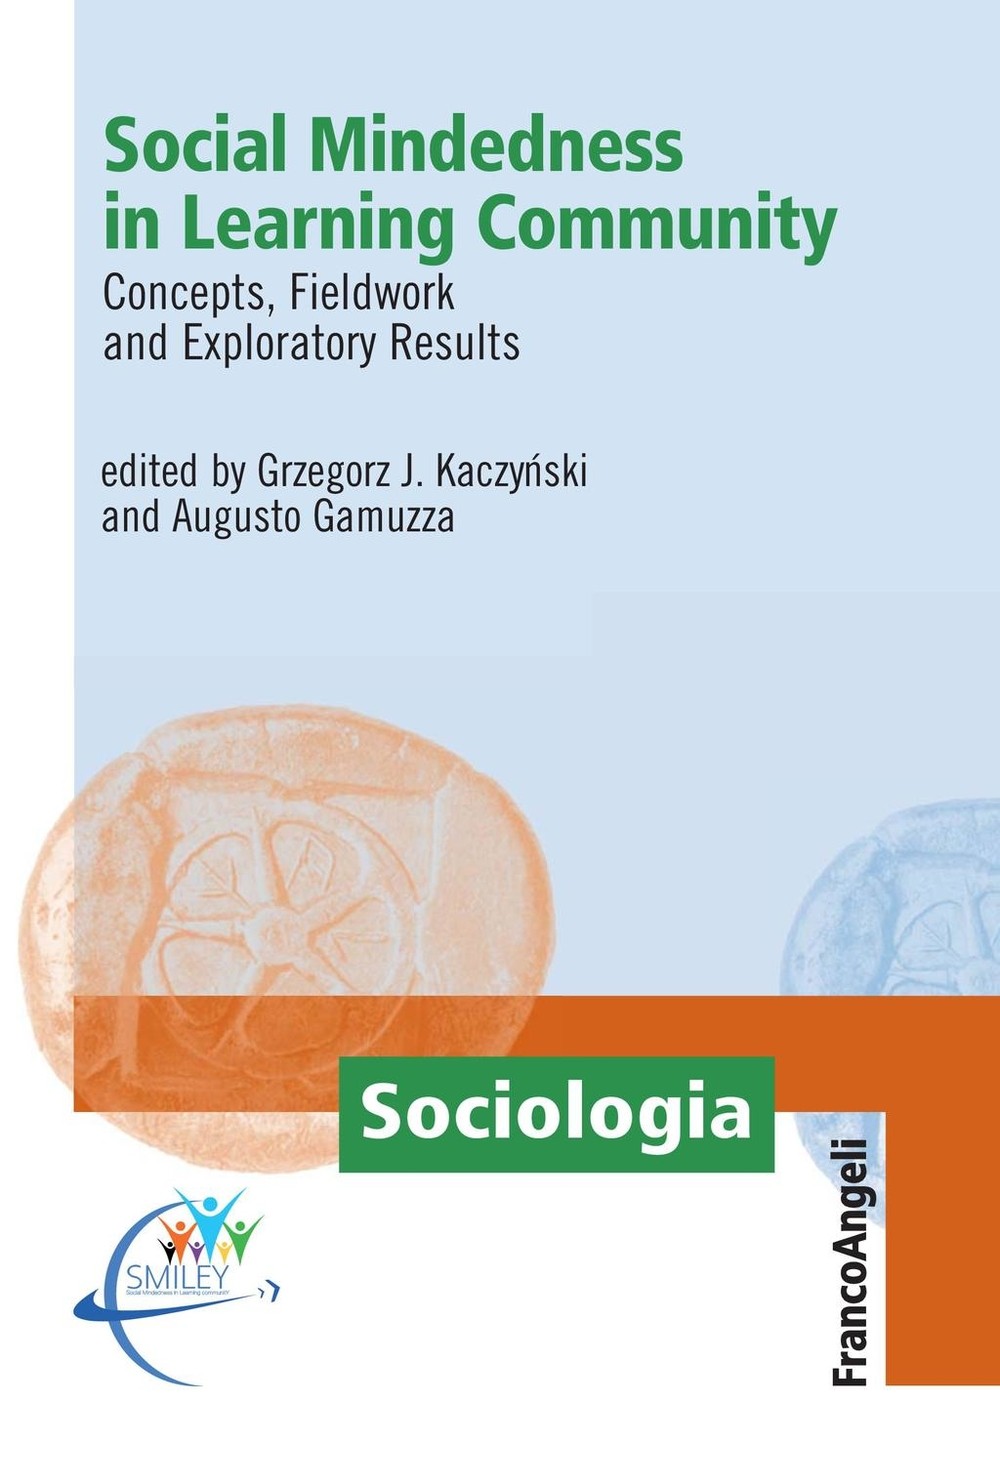 Social Mindedness in Learning Community. Concepts, Fieldwork and Exploratory Results - Librerie.coop